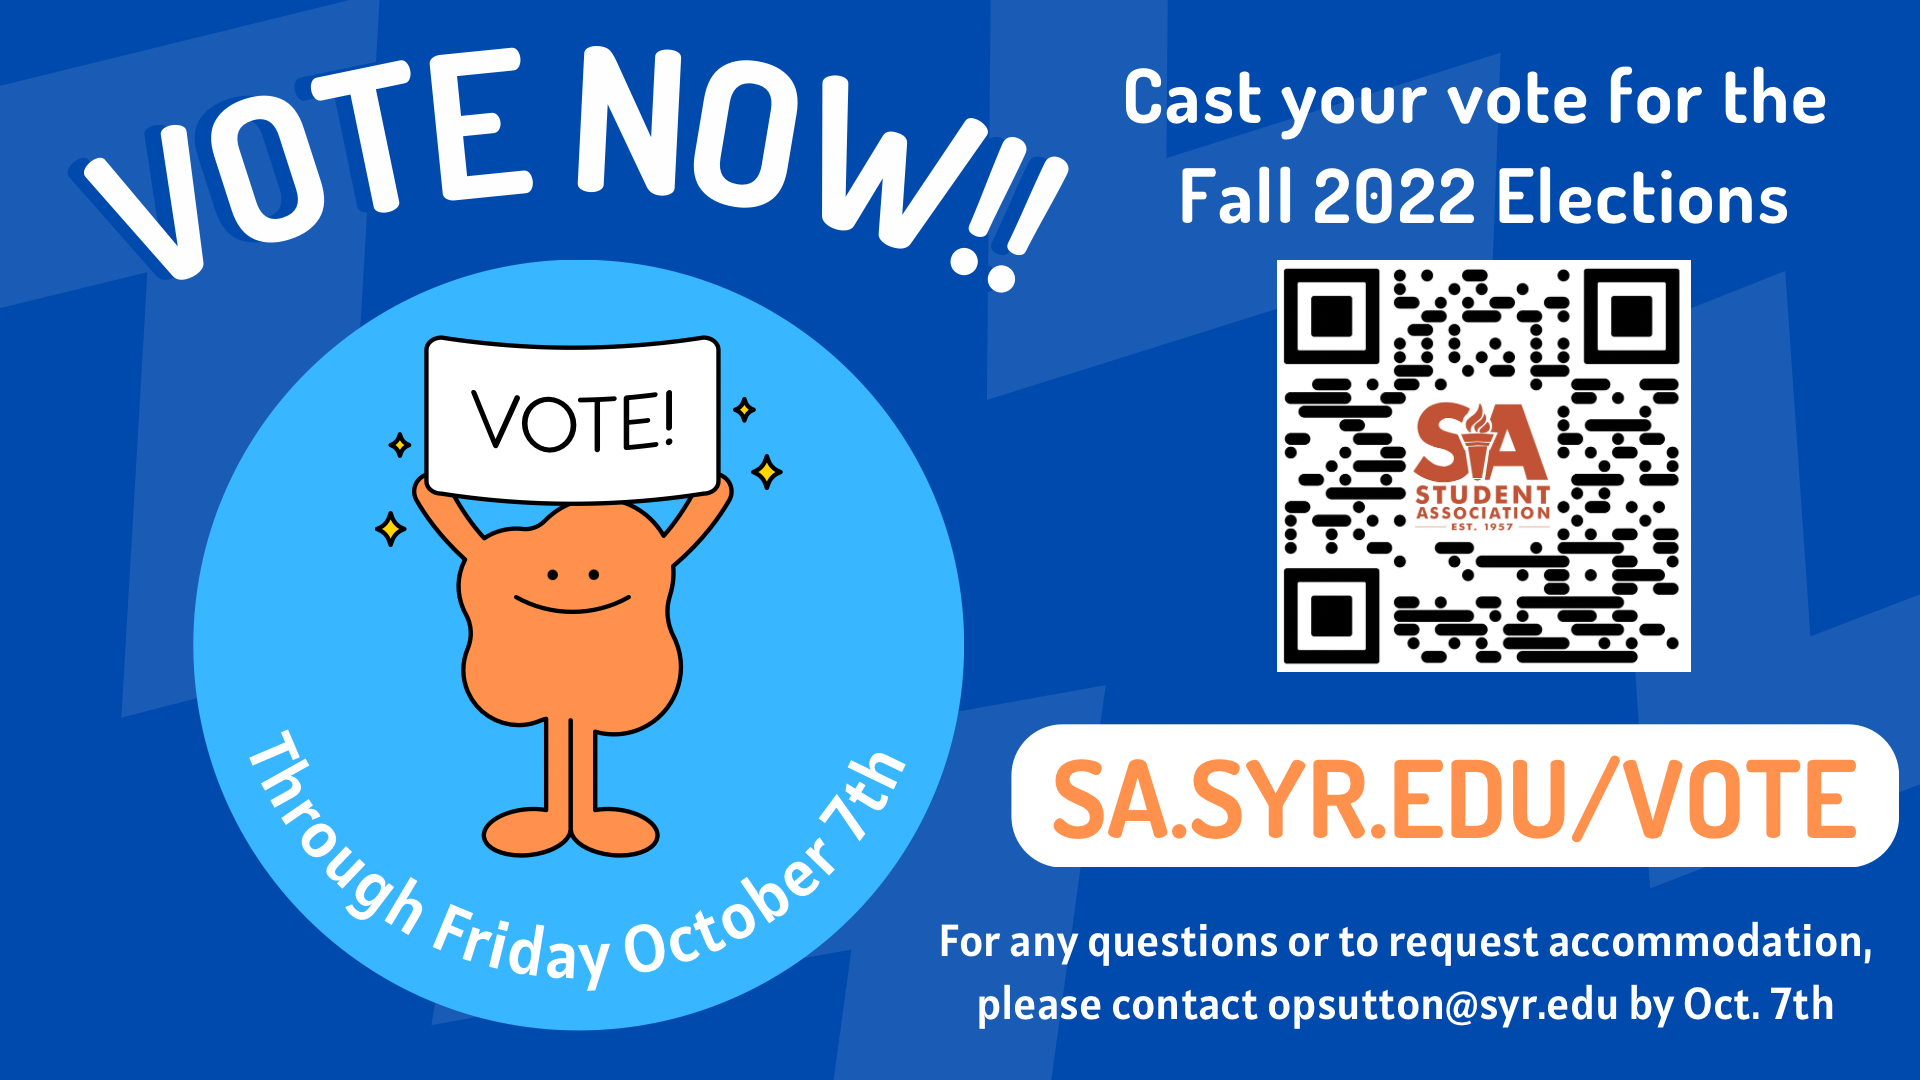 Digital signage encouraging undergrad students to vote in the Student Association Fall 2022 elections.